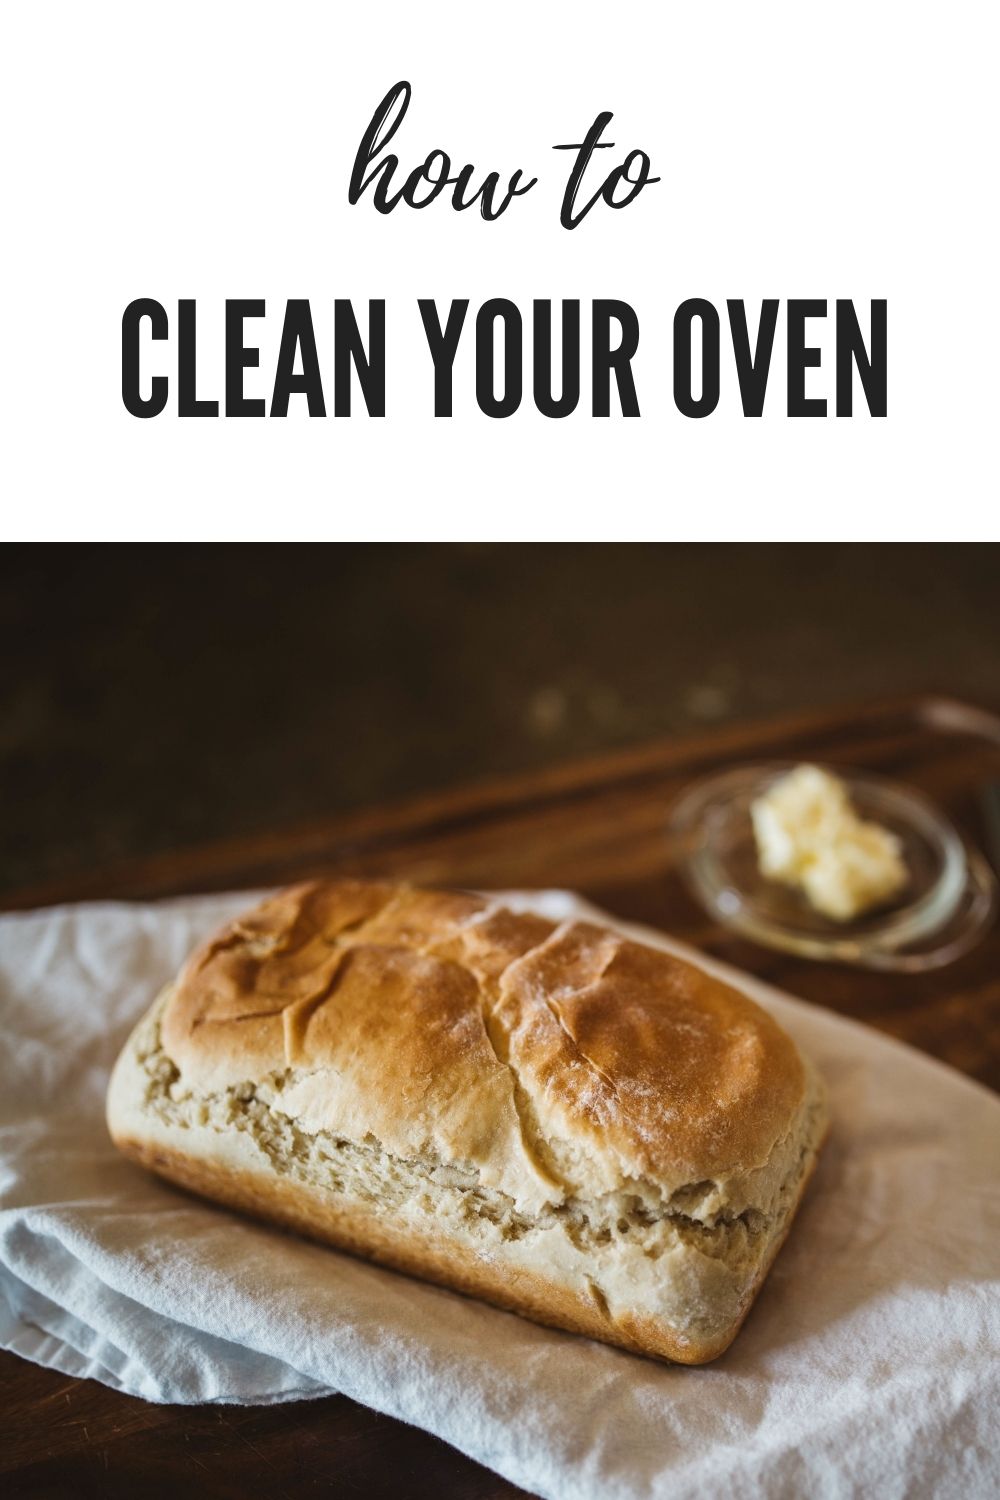 If you love baking, then you must be wondering ways to clean your oven and tips for extending your oven’s lifespan. #oven #hg #cleanoven #barbeque #bakecake #bakingcake #cleaningproducts